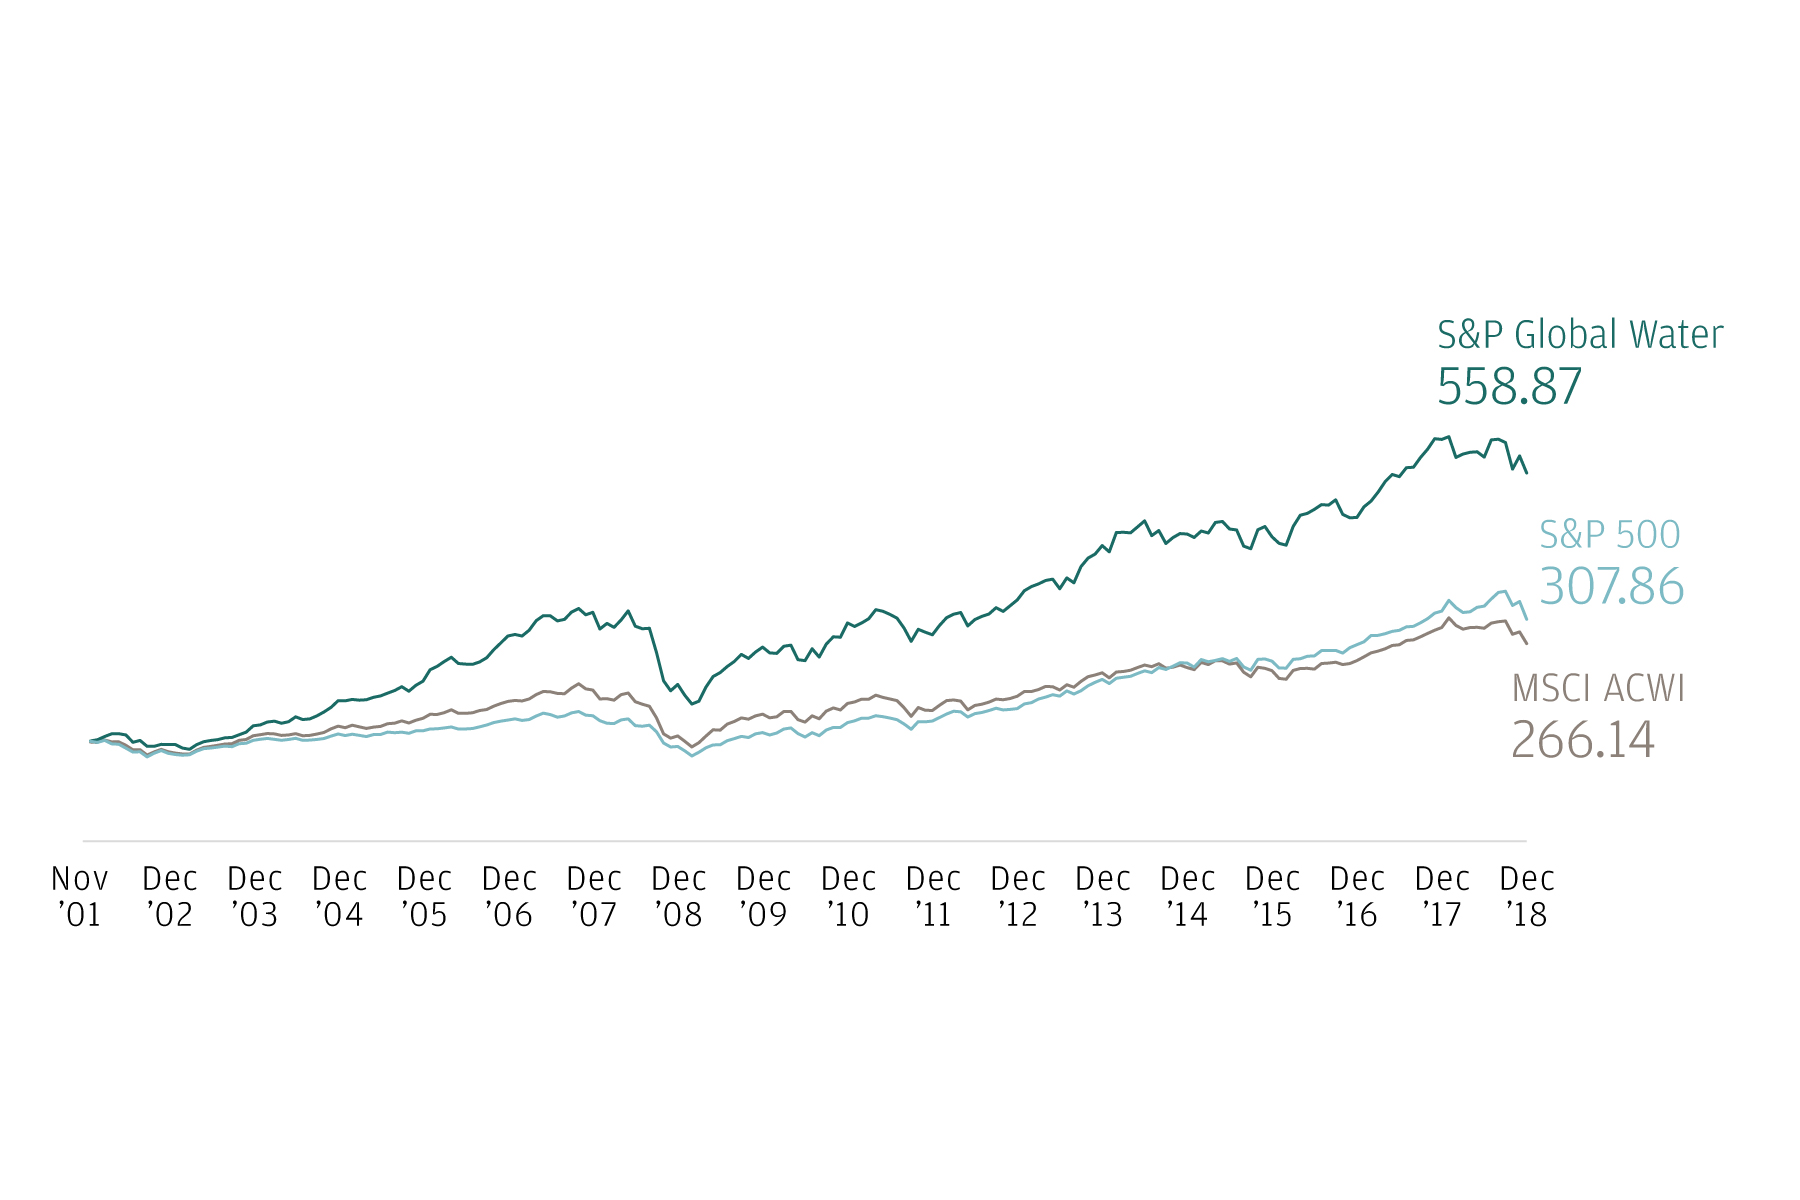 This three-line graph, covering the period November 2001 to April 2018, traces the growth in value of the MSCI ACWI Index, the S&P 500 Index and the S&P Global Water Index. 